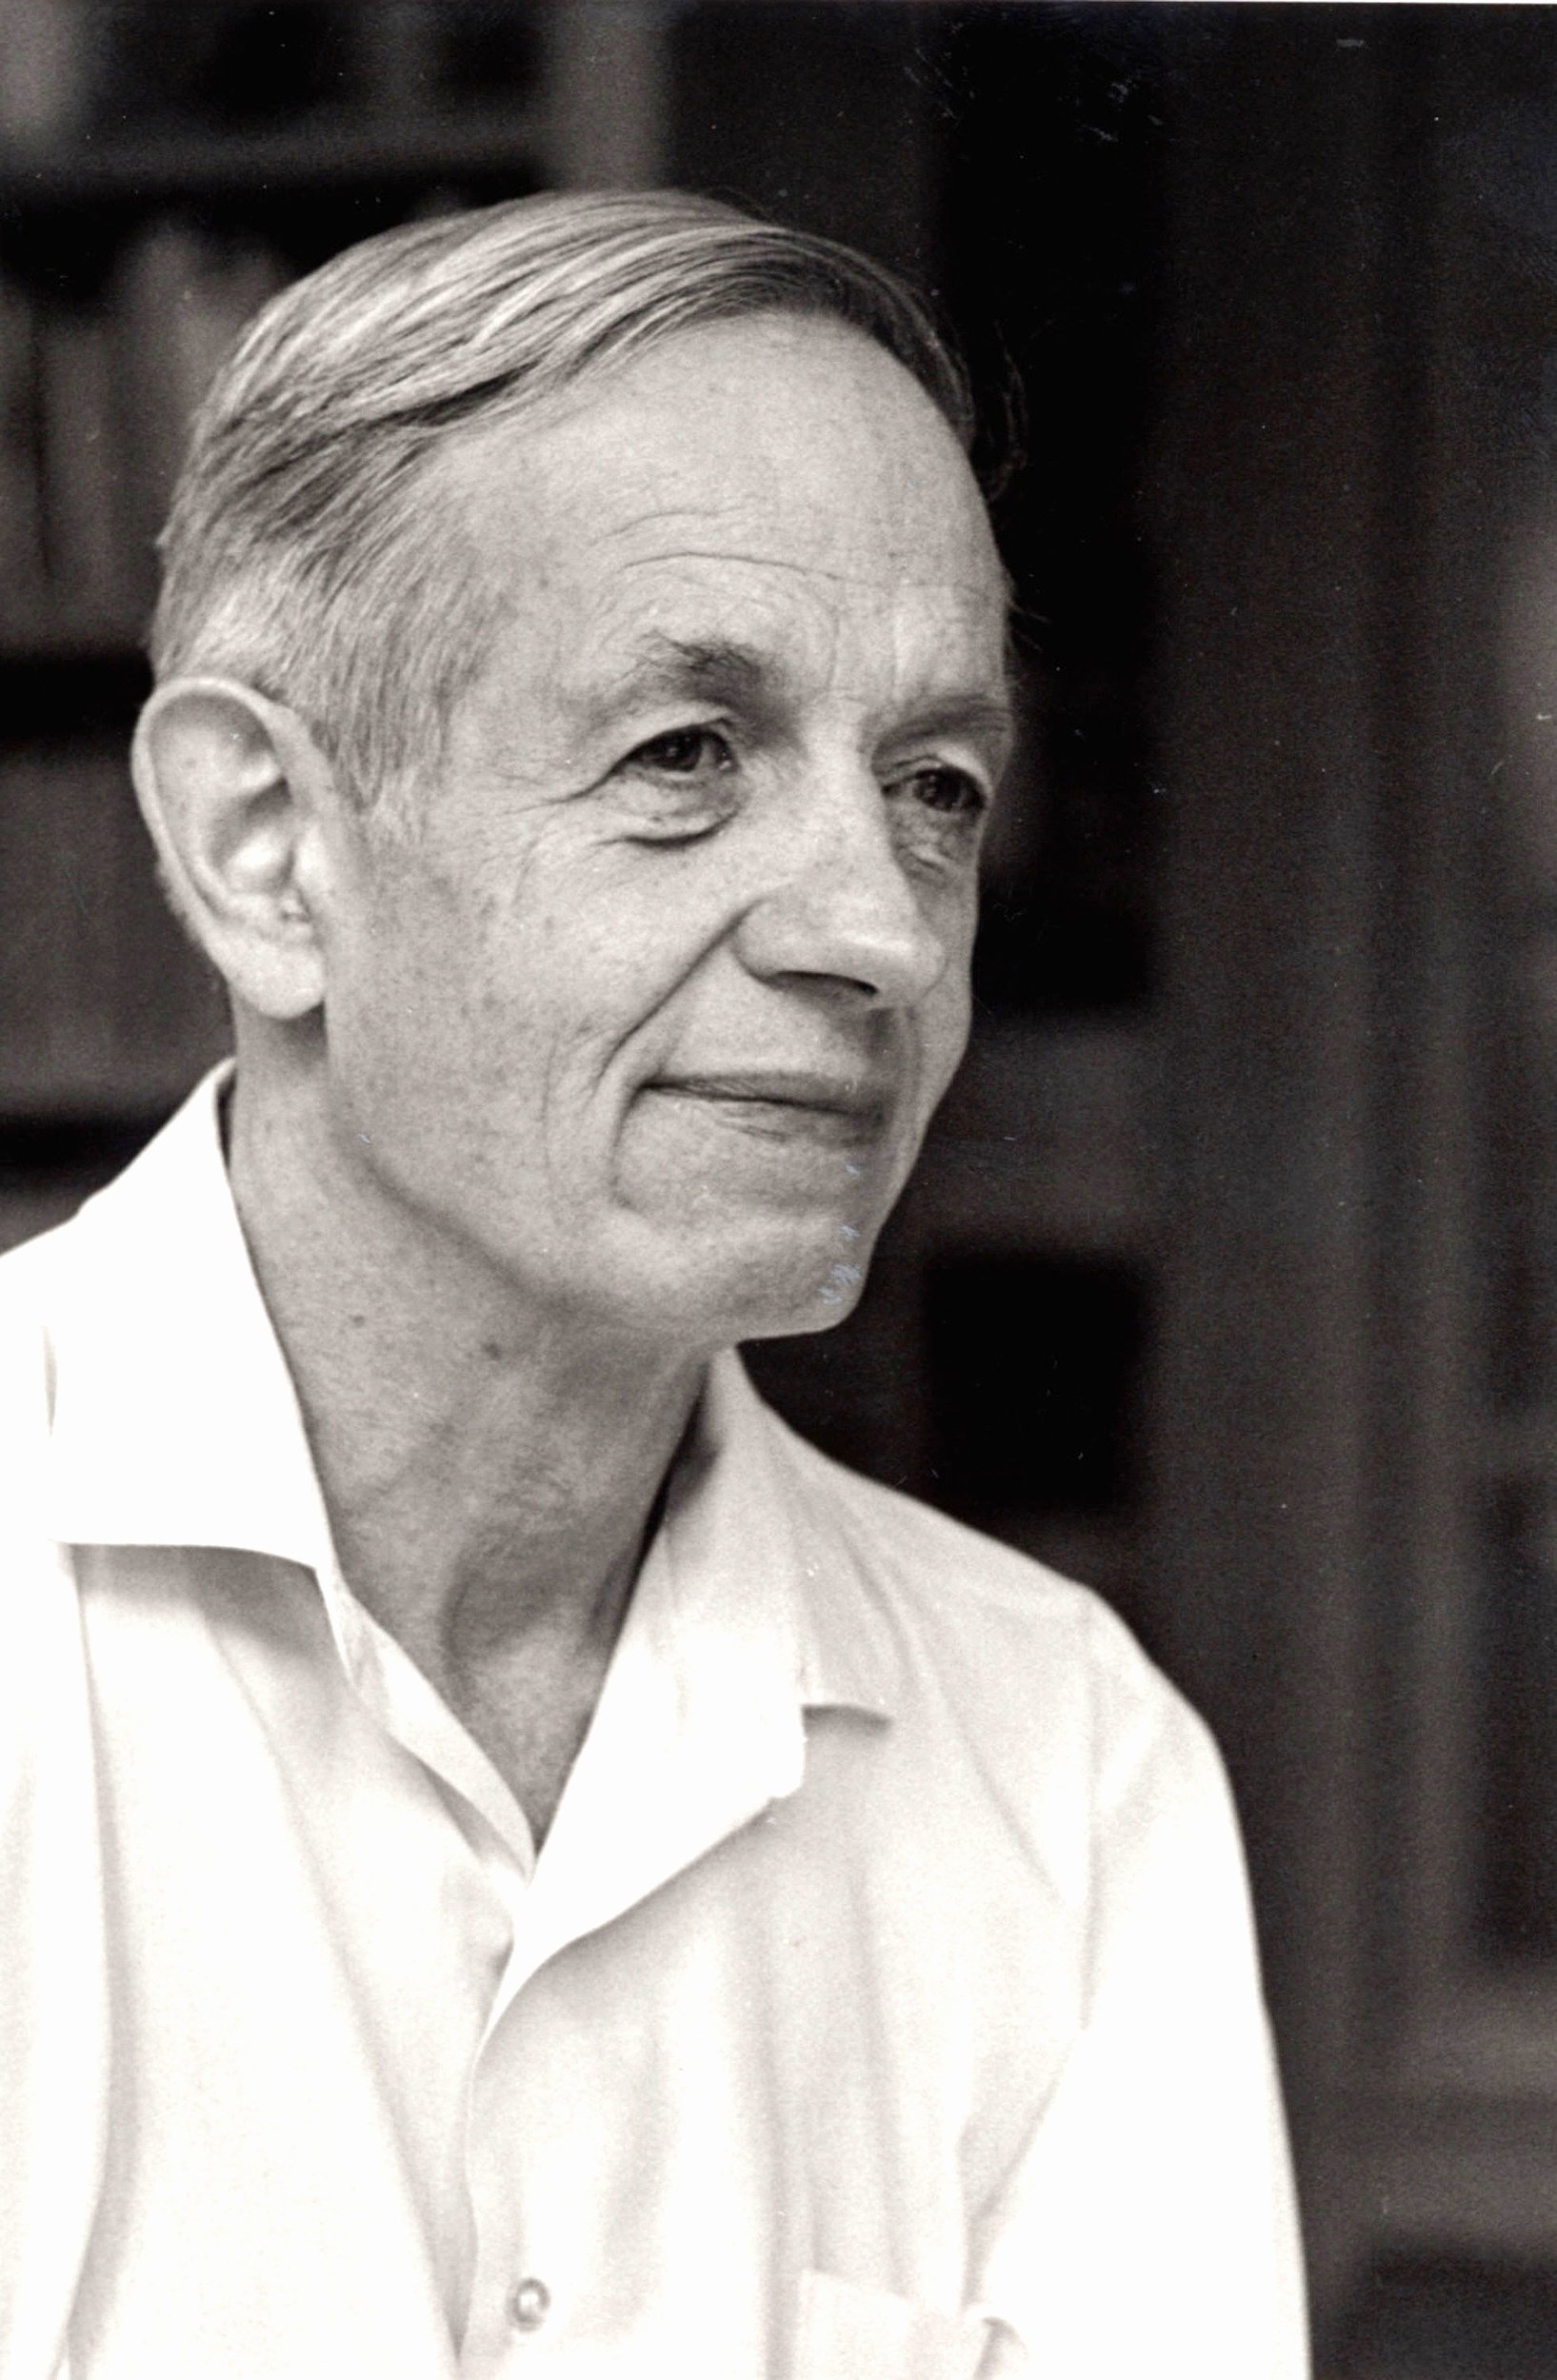 John Nash Letter Of Recommendation Beautiful Re Mendation Letter for John Nash is the Best We Ve Ever